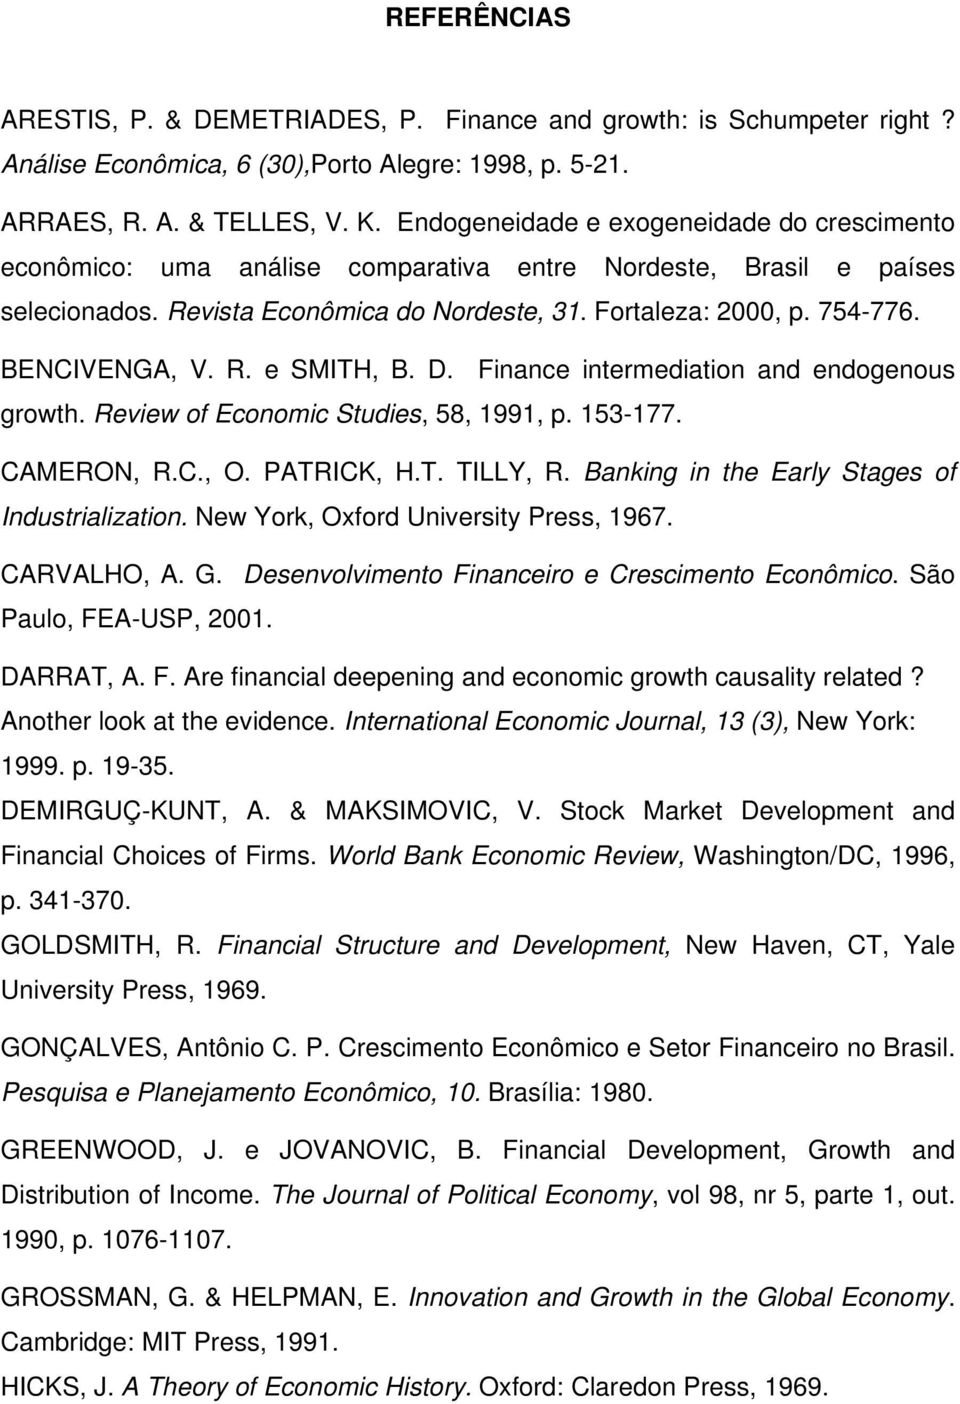 BENCIVENGA, V. R. e SMITH, B. D. Finance intermediation and endogenous growth. Review of Economic Studies, 58, 1991, p. 153-177. CAMERON, R.C., O. PATRICK, H.T. TILLY, R.